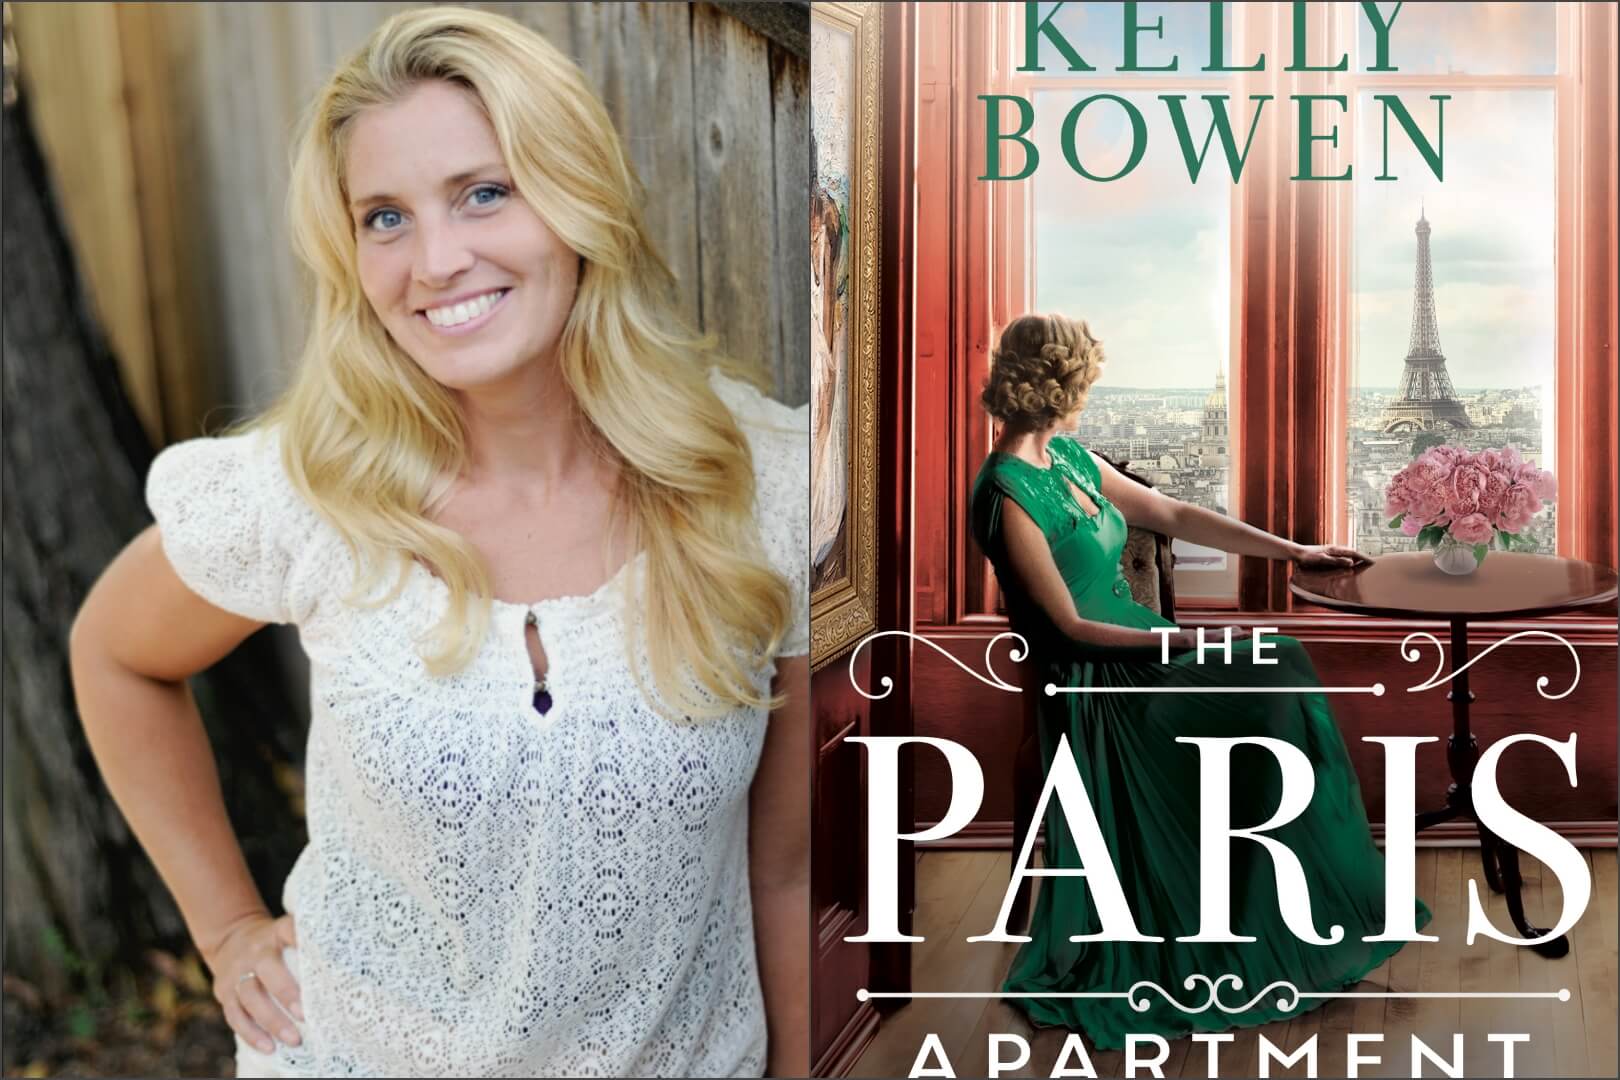 Q&A with Kelly Bowen, Author of The Paris Apartment